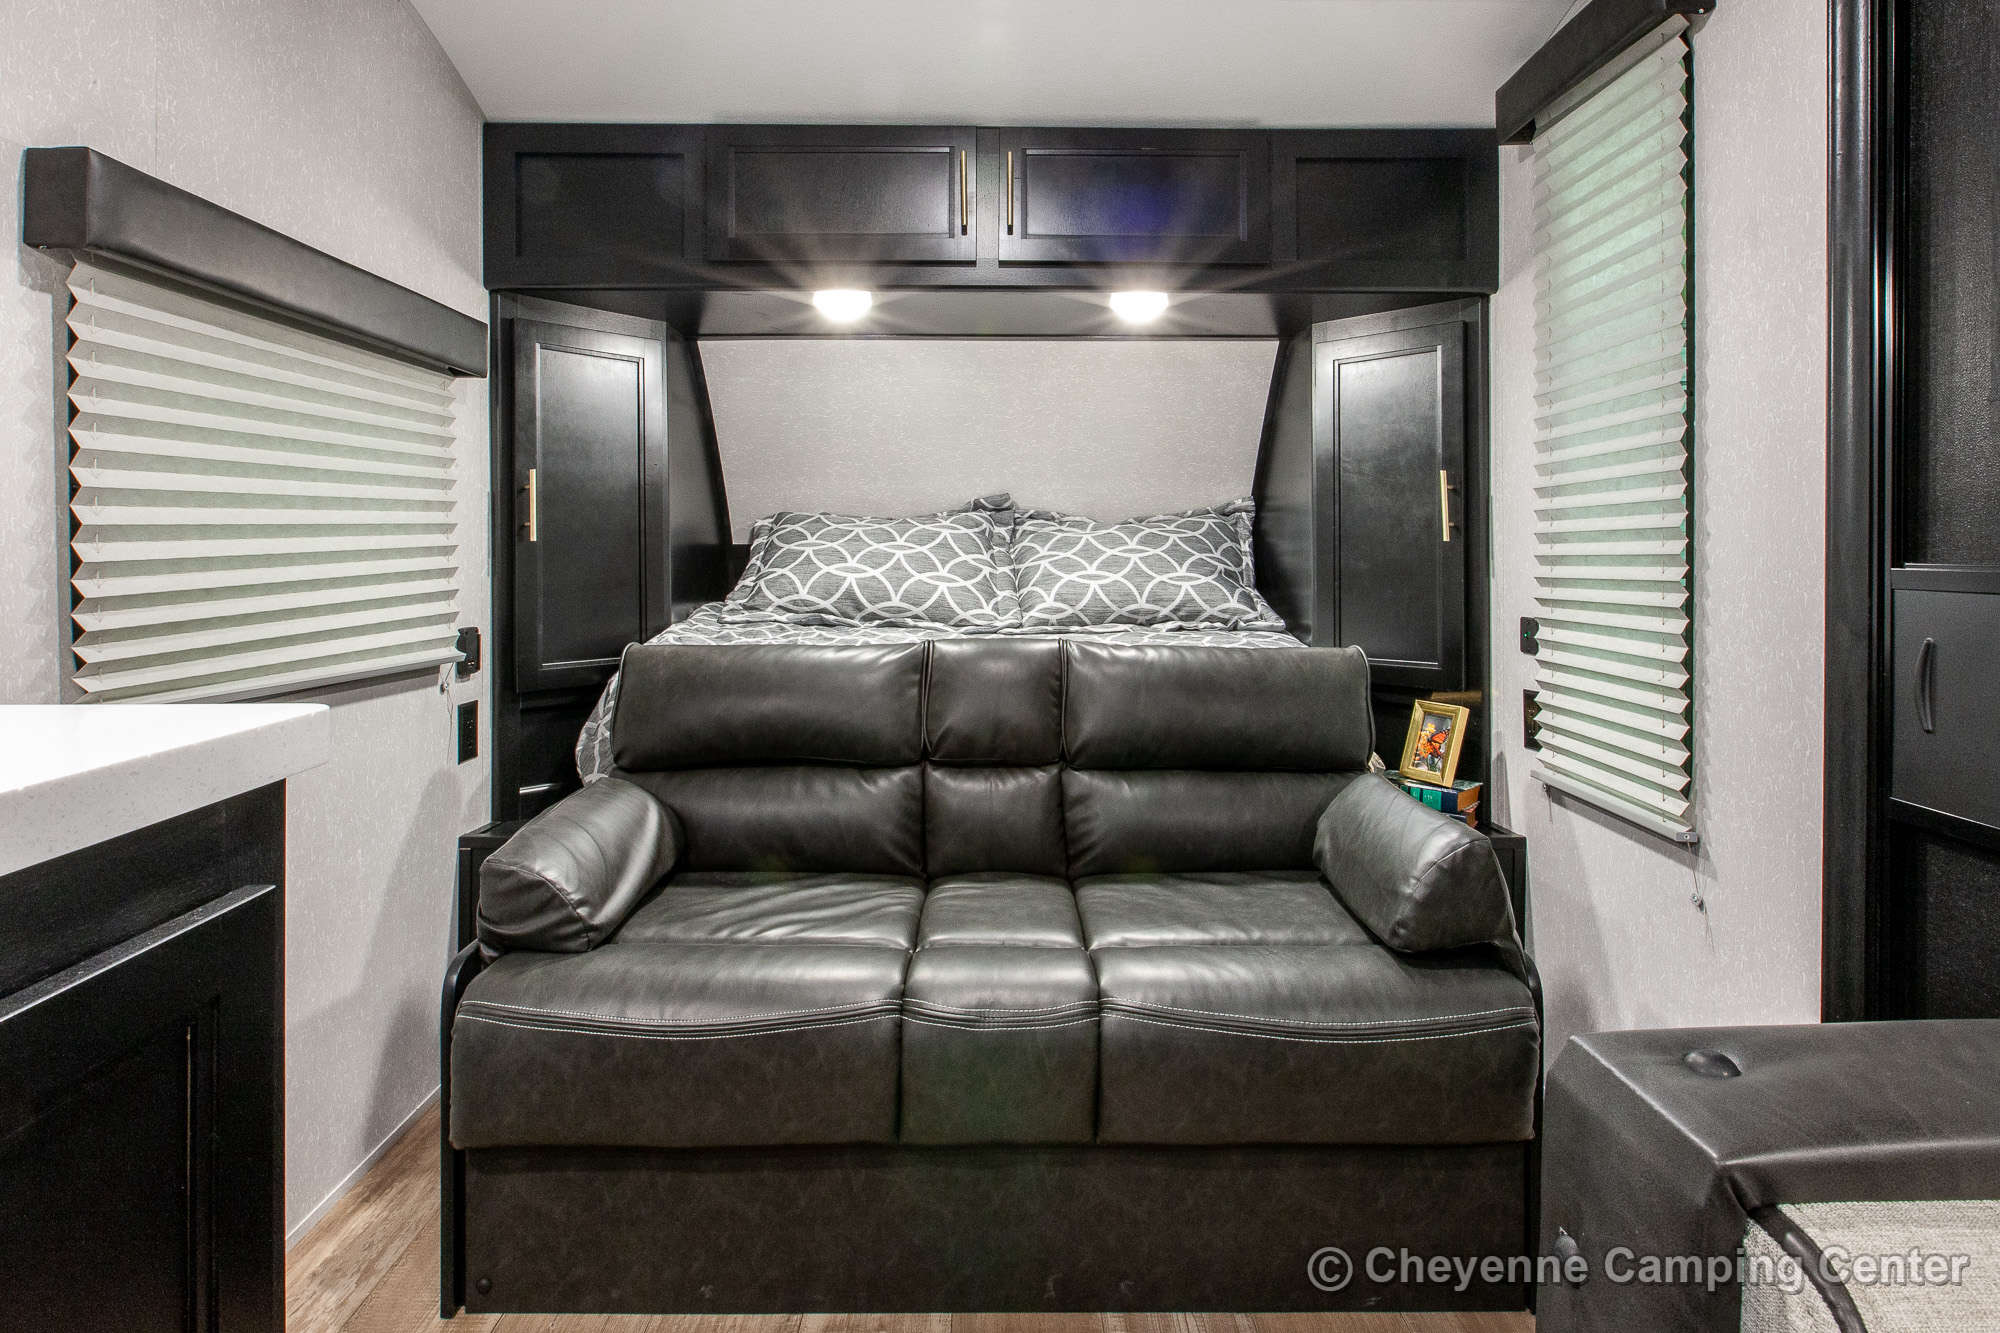 2022 Forest River Cherokee Wolf Pup Black Label 16FQBL Travel Trailer Interior Image